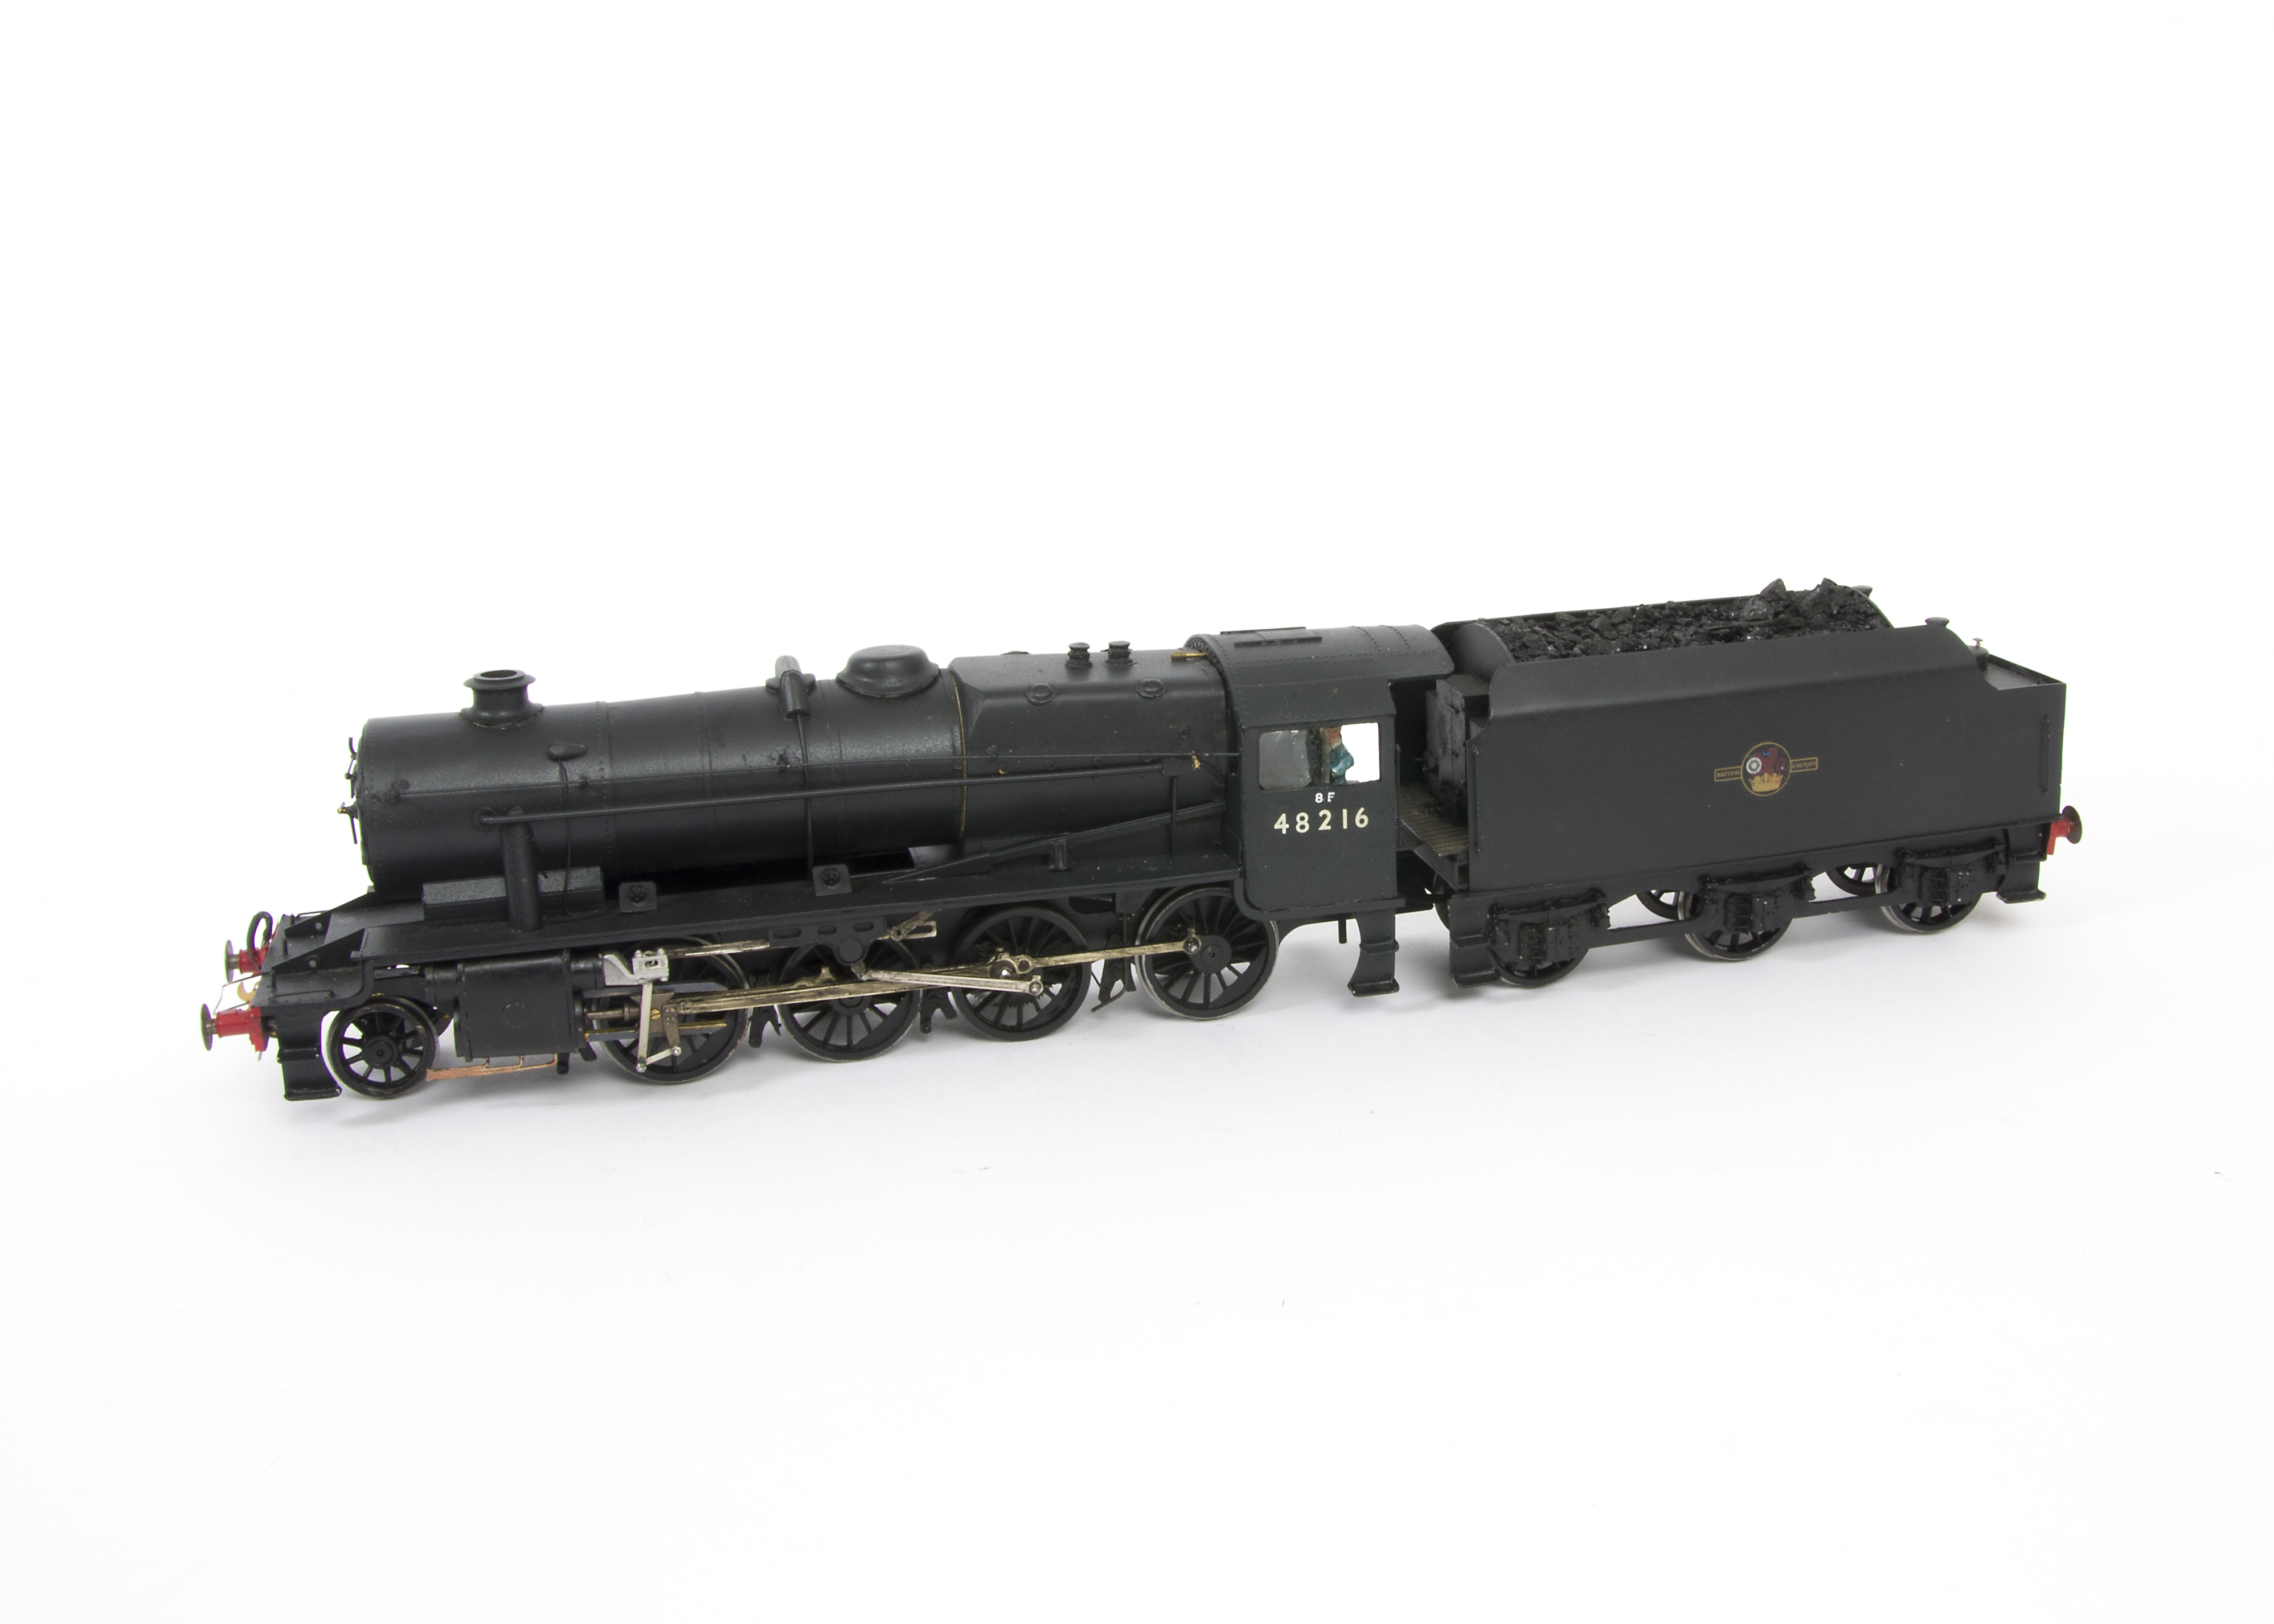 A Finescale O Gauge Ex-LMS Stanier Class 8F 2-8-0 Locomotive and Tender from Unknown Kit, nicely